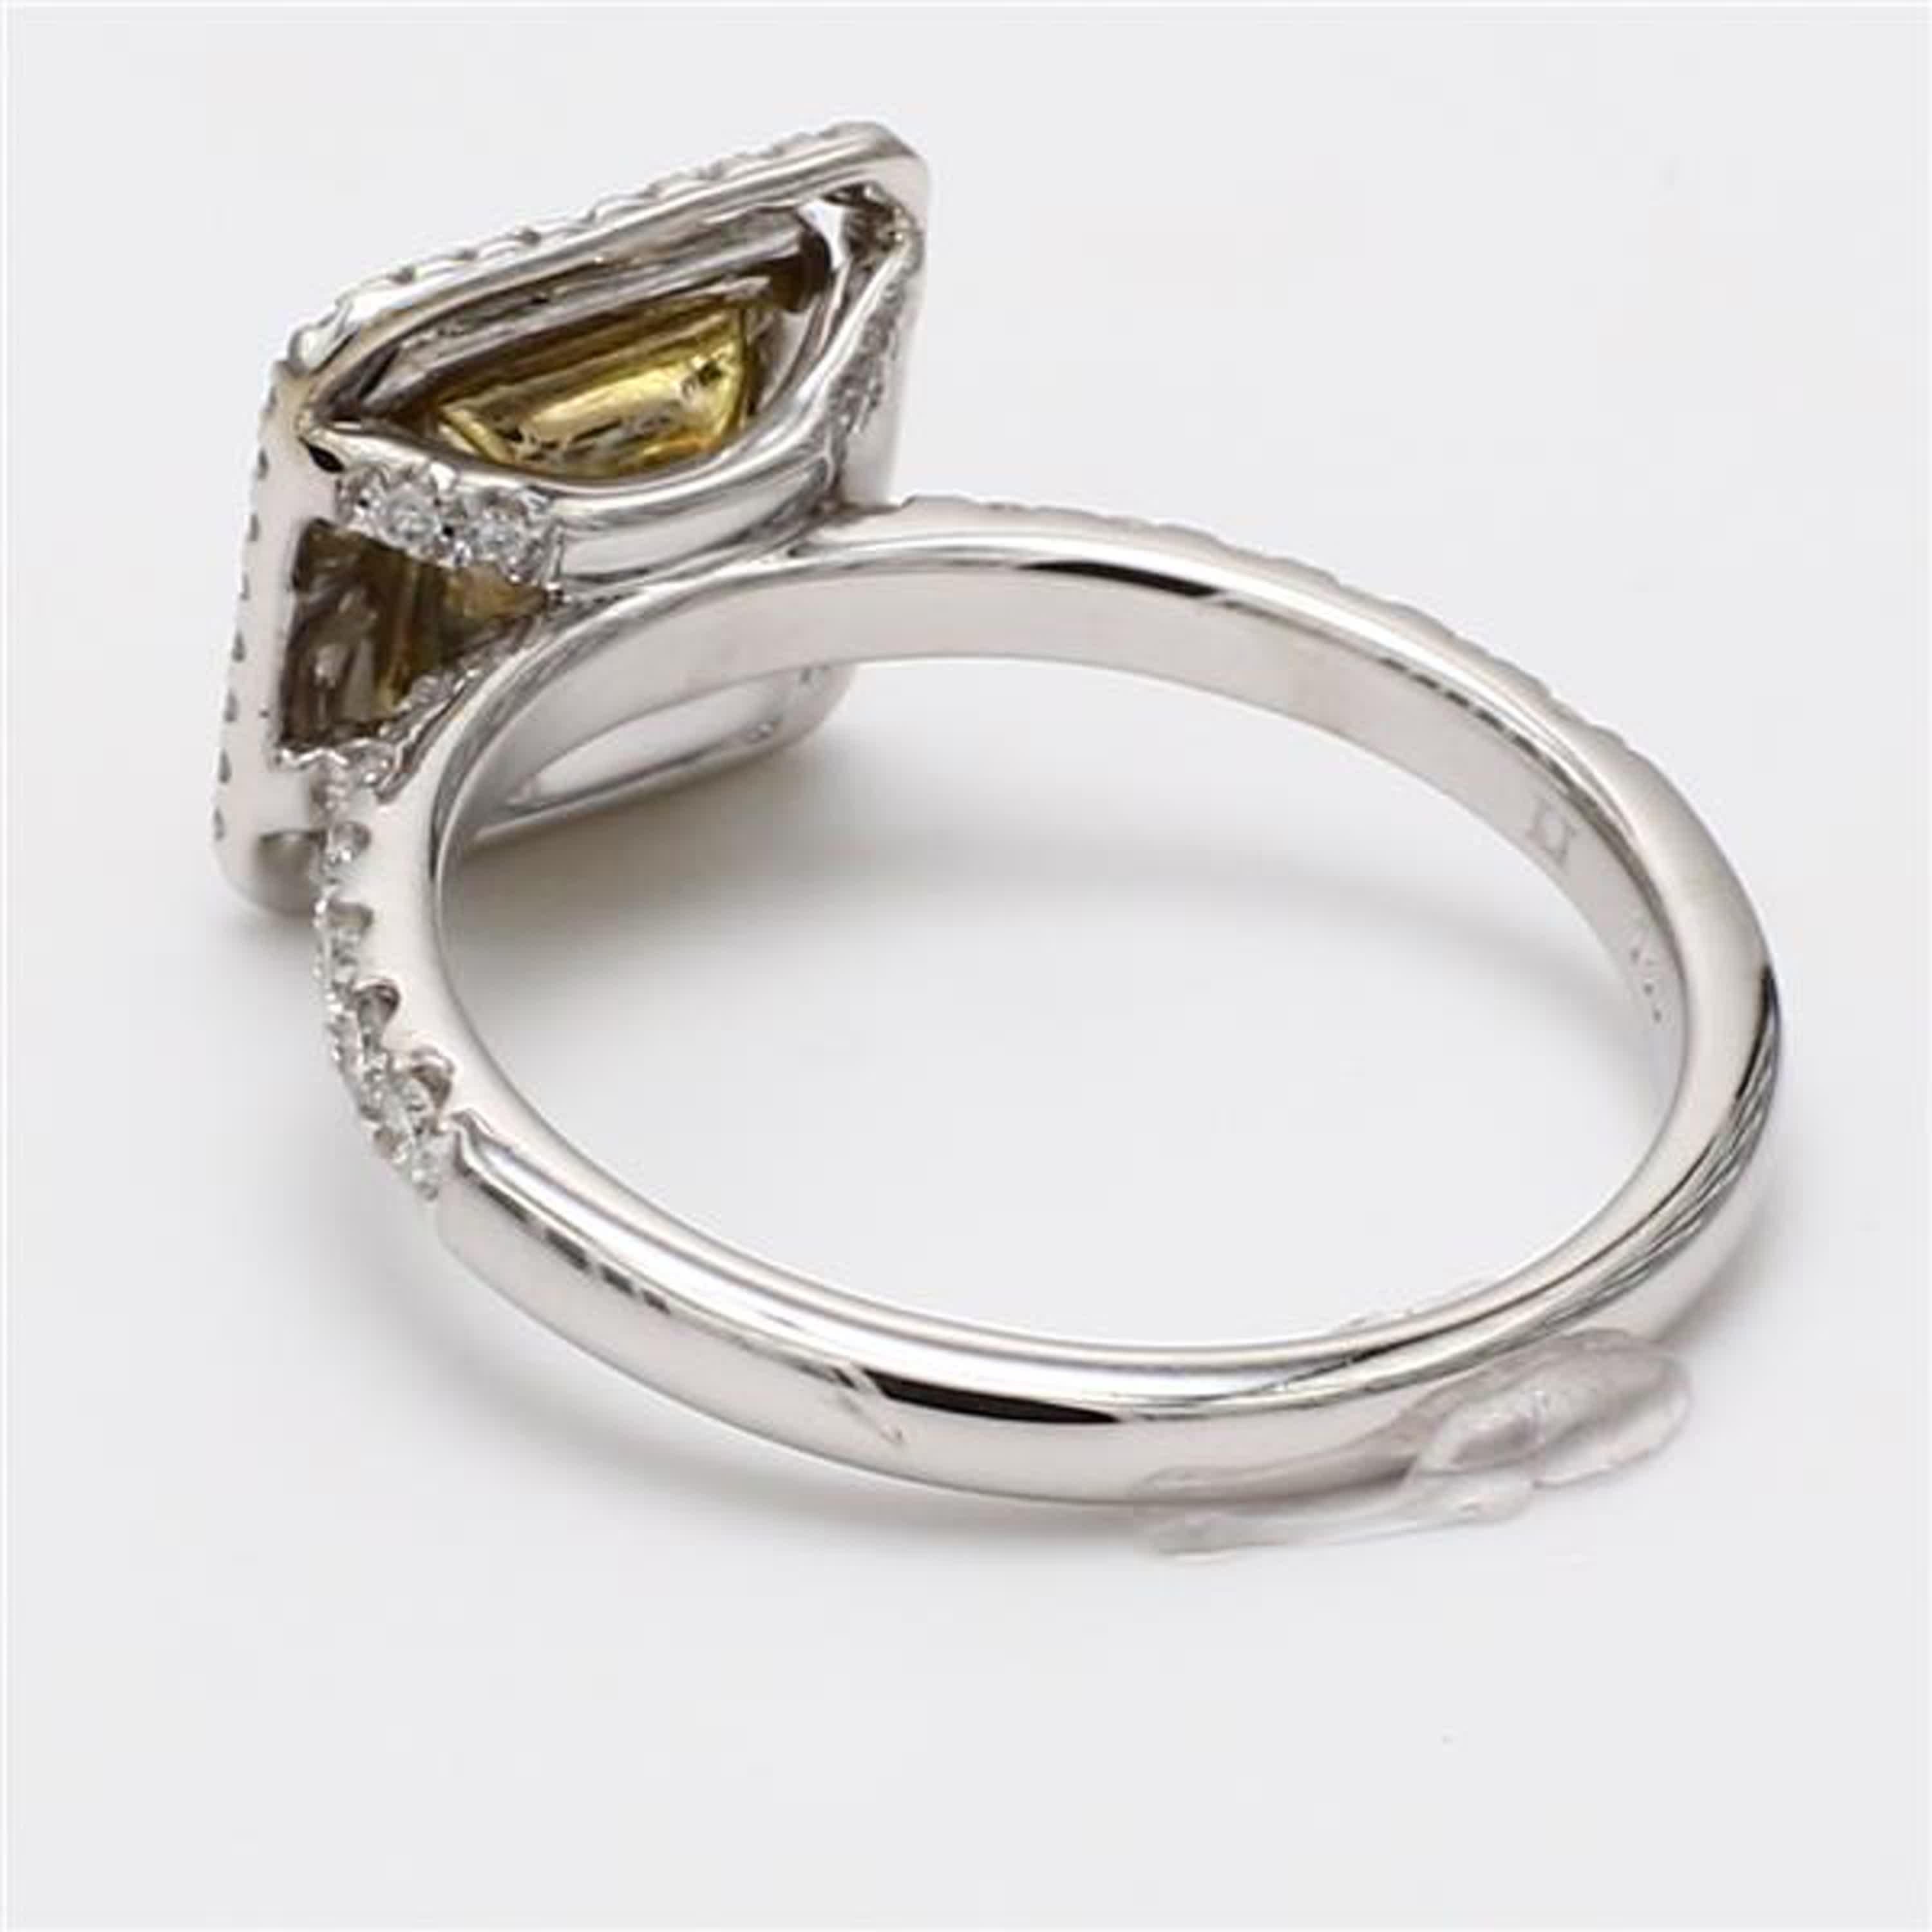 Contemporary Natural Yellow Cushion and White Diamond 1.36 Carat TW White Gold Cocktail Ring